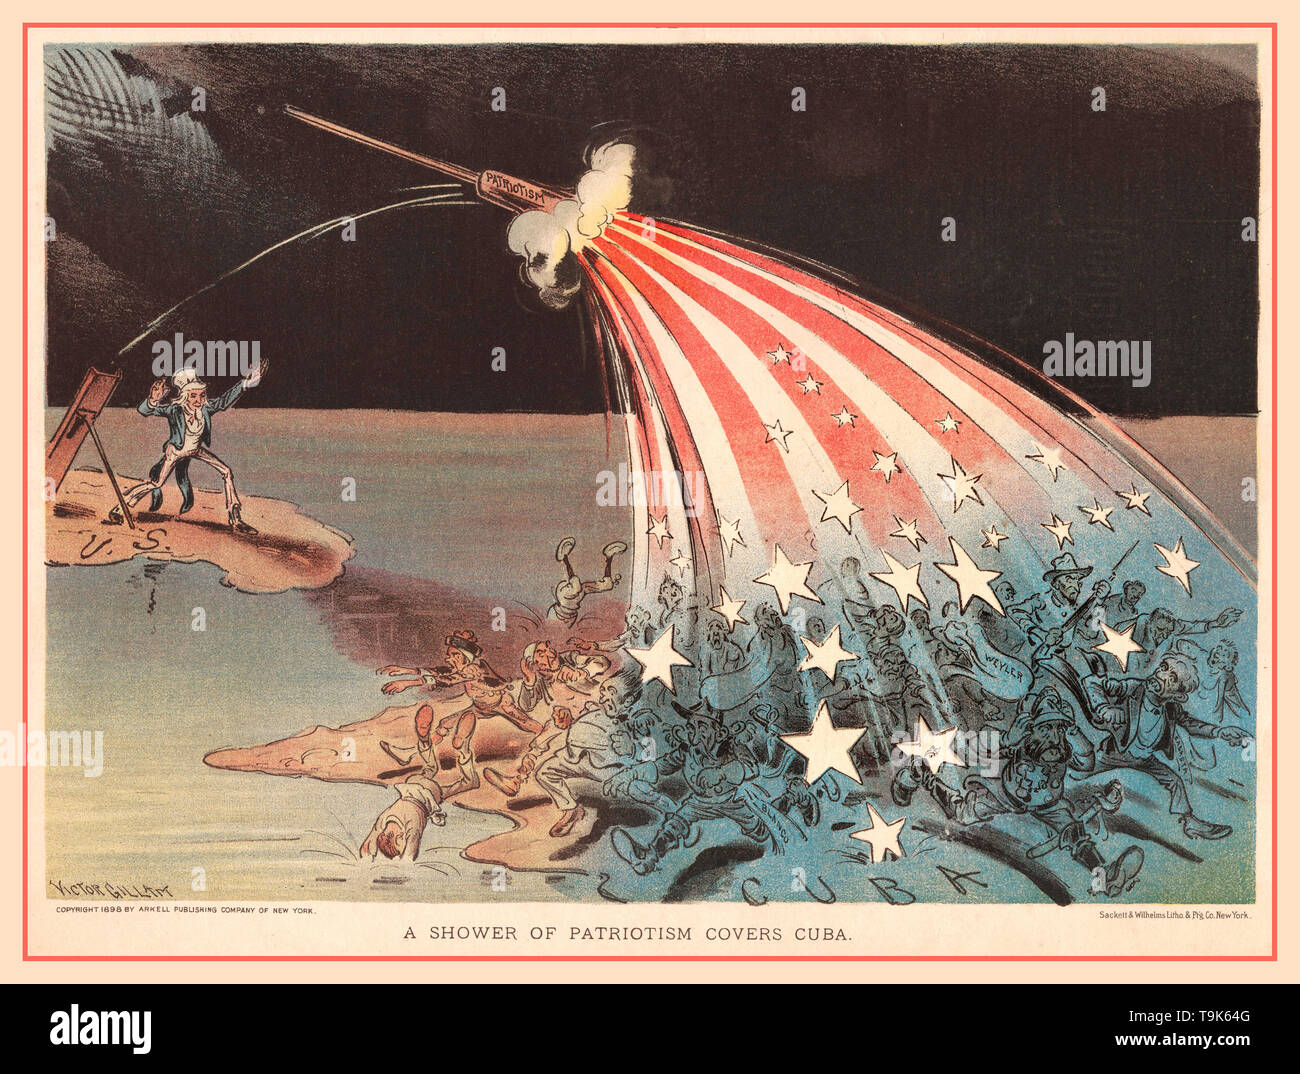 Vintage 1890's Cuba American Political illustration 'Showering Patriotism over Cuba' [1898] A cartoon map from ‘Judge Magazine’ supporting the Spanish-American War. Uncle Sam launches a barrage from the U.S. that shows as patriotic fireworks - and routes the Spanish in Cuba. One of those fleeing from the attack is General Valeriano Weyler, installed by the Spanish as Governor of Cuba in 1896 with the mission of suppressing the War of Independence. Stock Photo